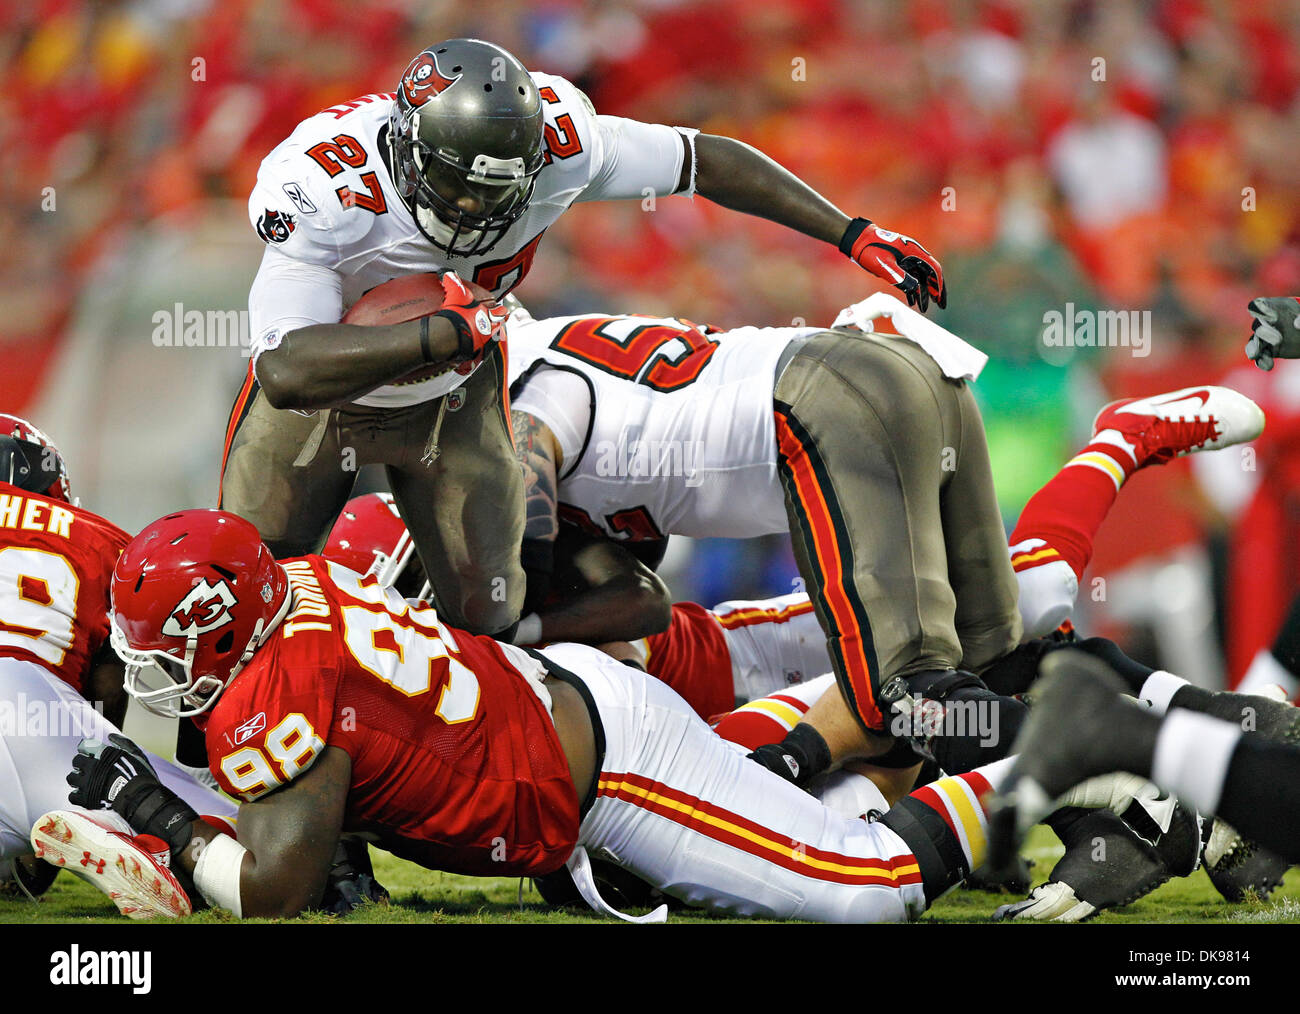 Aug. 12, 2011 - DANIEL WALLACE   |   Times.OT 341695 WALL Bucs 5 (08/12/2011 Kansas City, Mo.) Tampa Bay Buccaneers running back LeGarrette Blount (27) goes up the middle for three yards during the first quarter, tripped up by Kansas City Chiefs defensive tackle Anthony Toribio (98). FIRST HALF ACTION: The Tampa Bay Buccaneers play the Kansas City Chiefs at Arrowhead Stadium in Kan Stock Photo